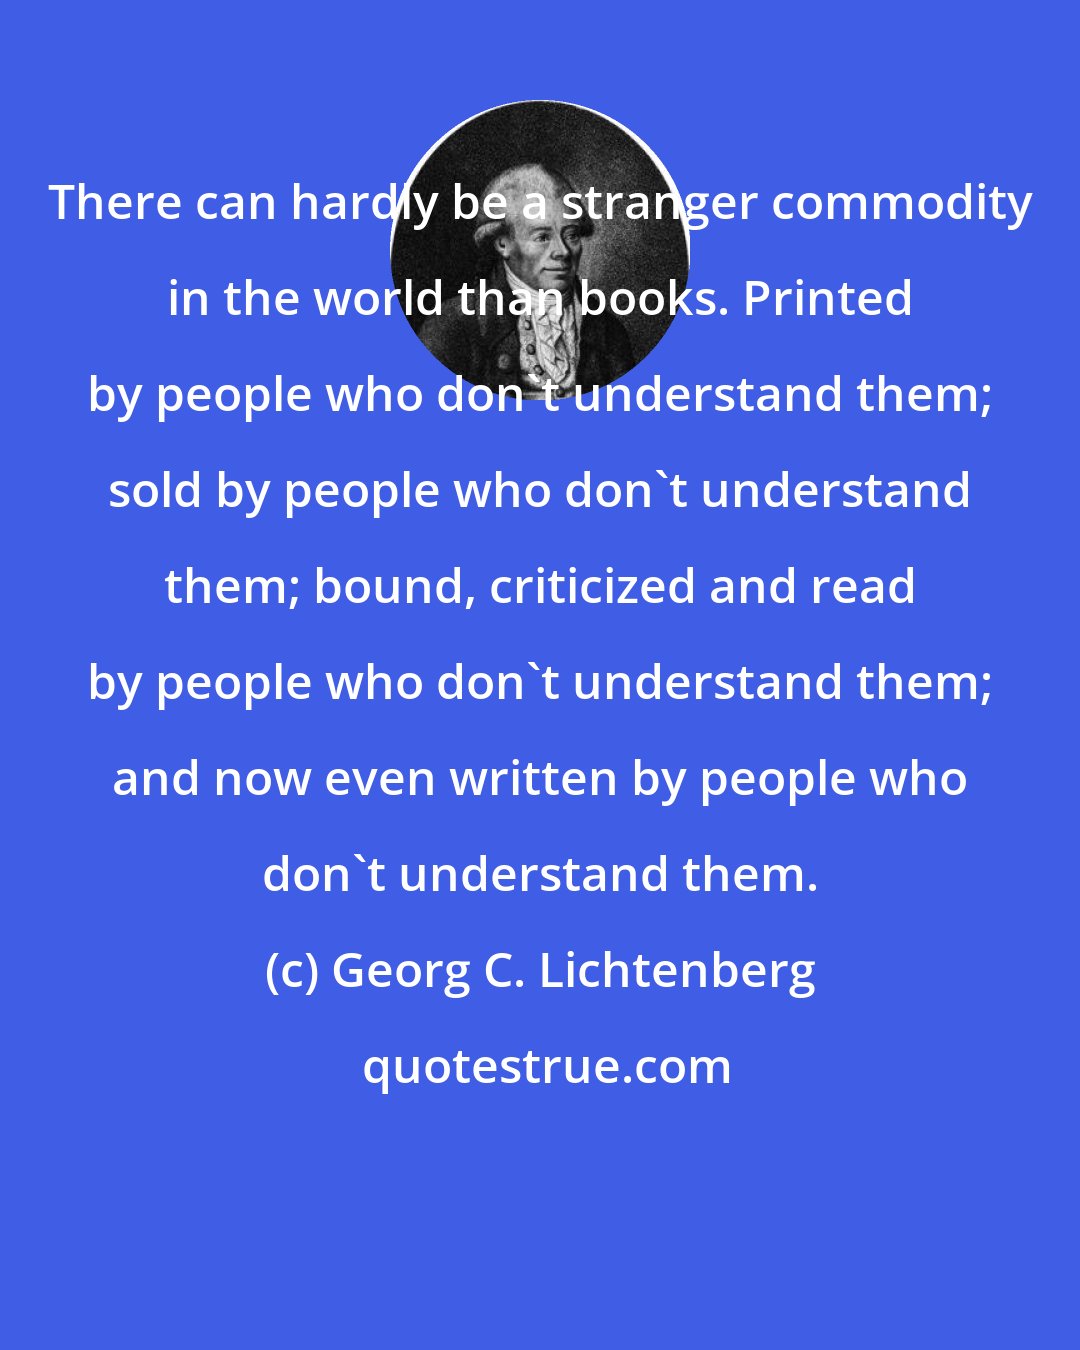 Georg C. Lichtenberg: There can hardly be a stranger commodity in the world than books. Printed by people who don't understand them; sold by people who don't understand them; bound, criticized and read by people who don't understand them; and now even written by people who don't understand them.